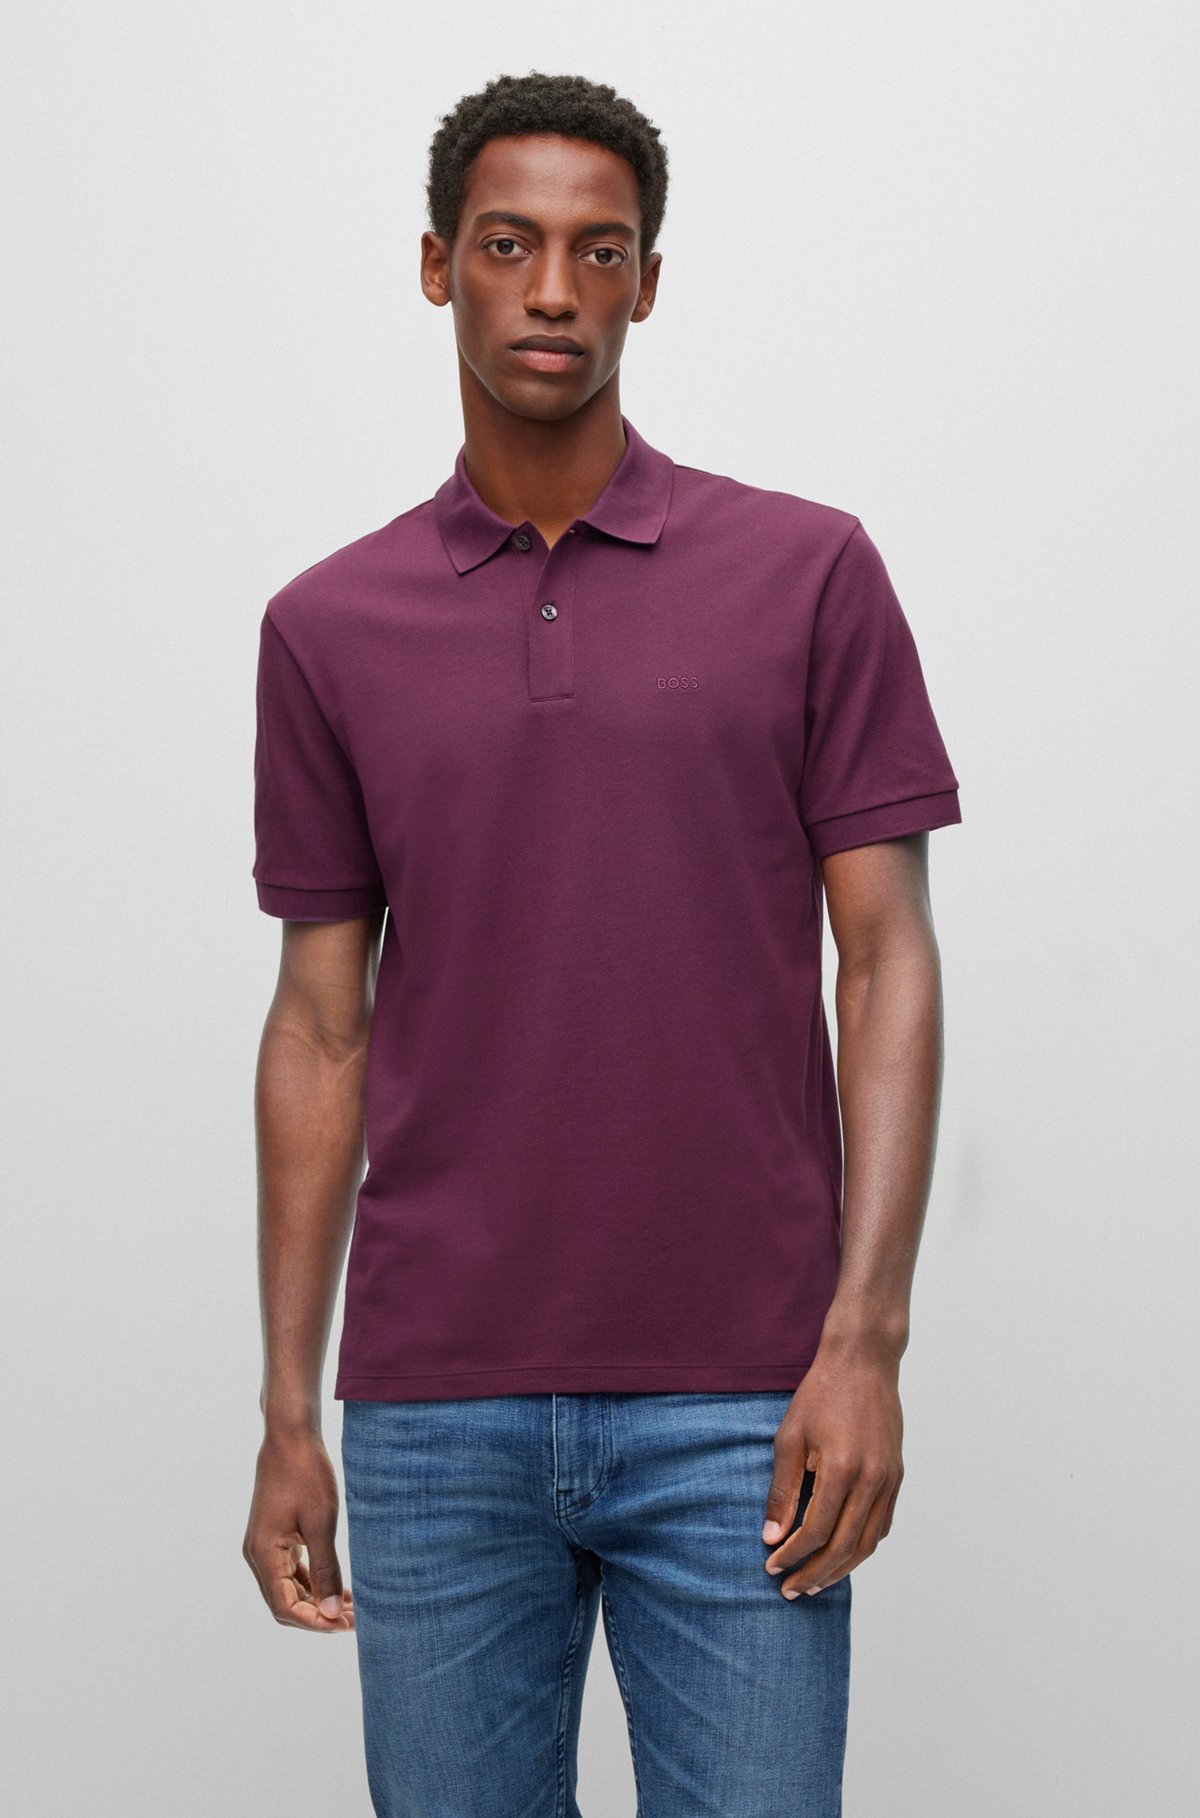 Verbanning Spin geur BOSS - Organic-cotton polo shirt with embroidered logo